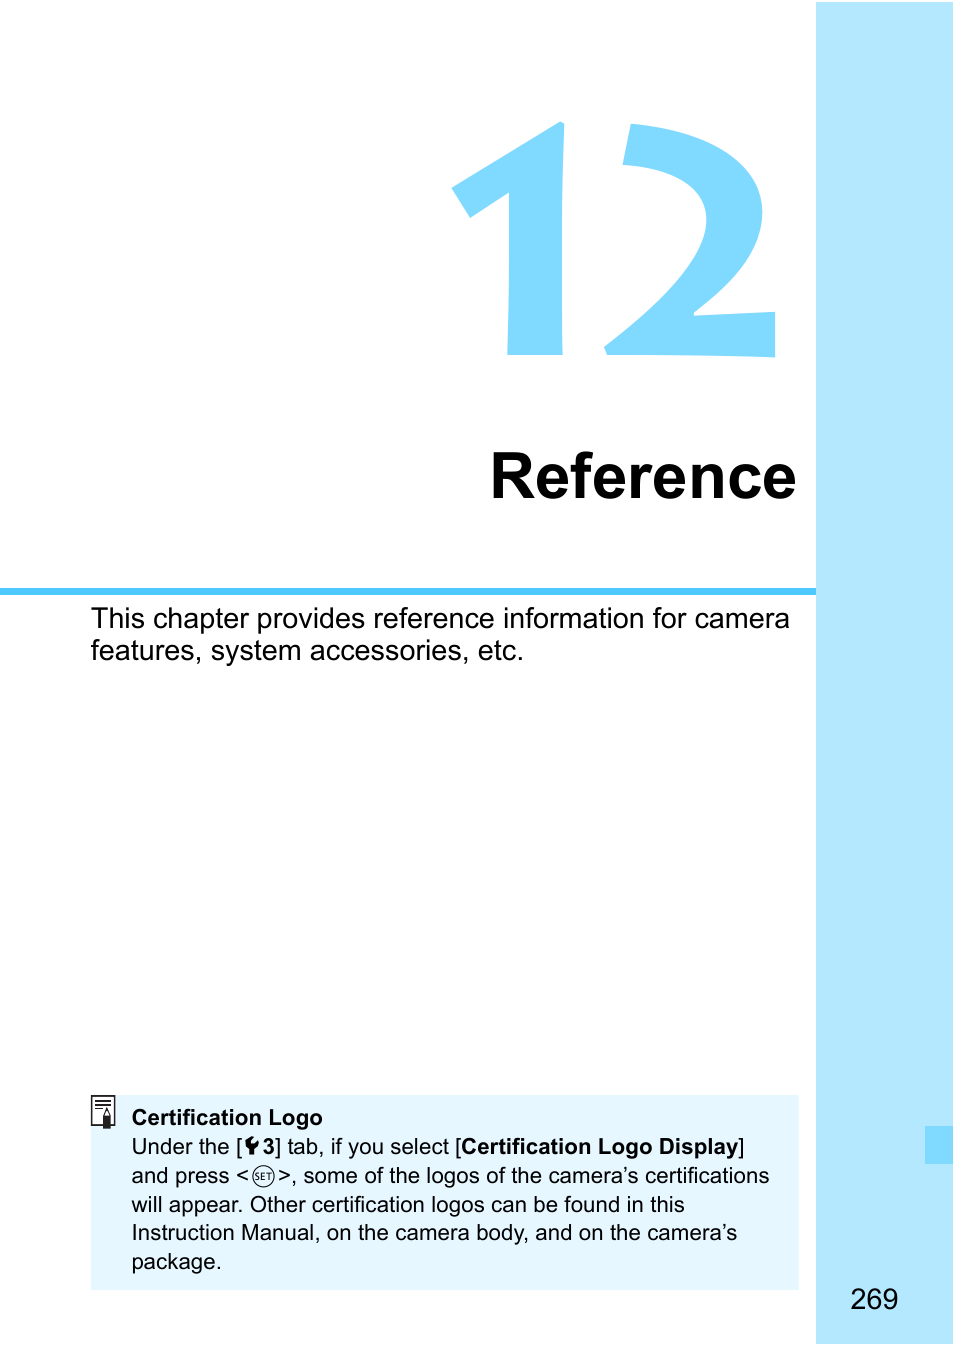 Reference | Canon EOS 1300D User Manual | Page 269 / 326